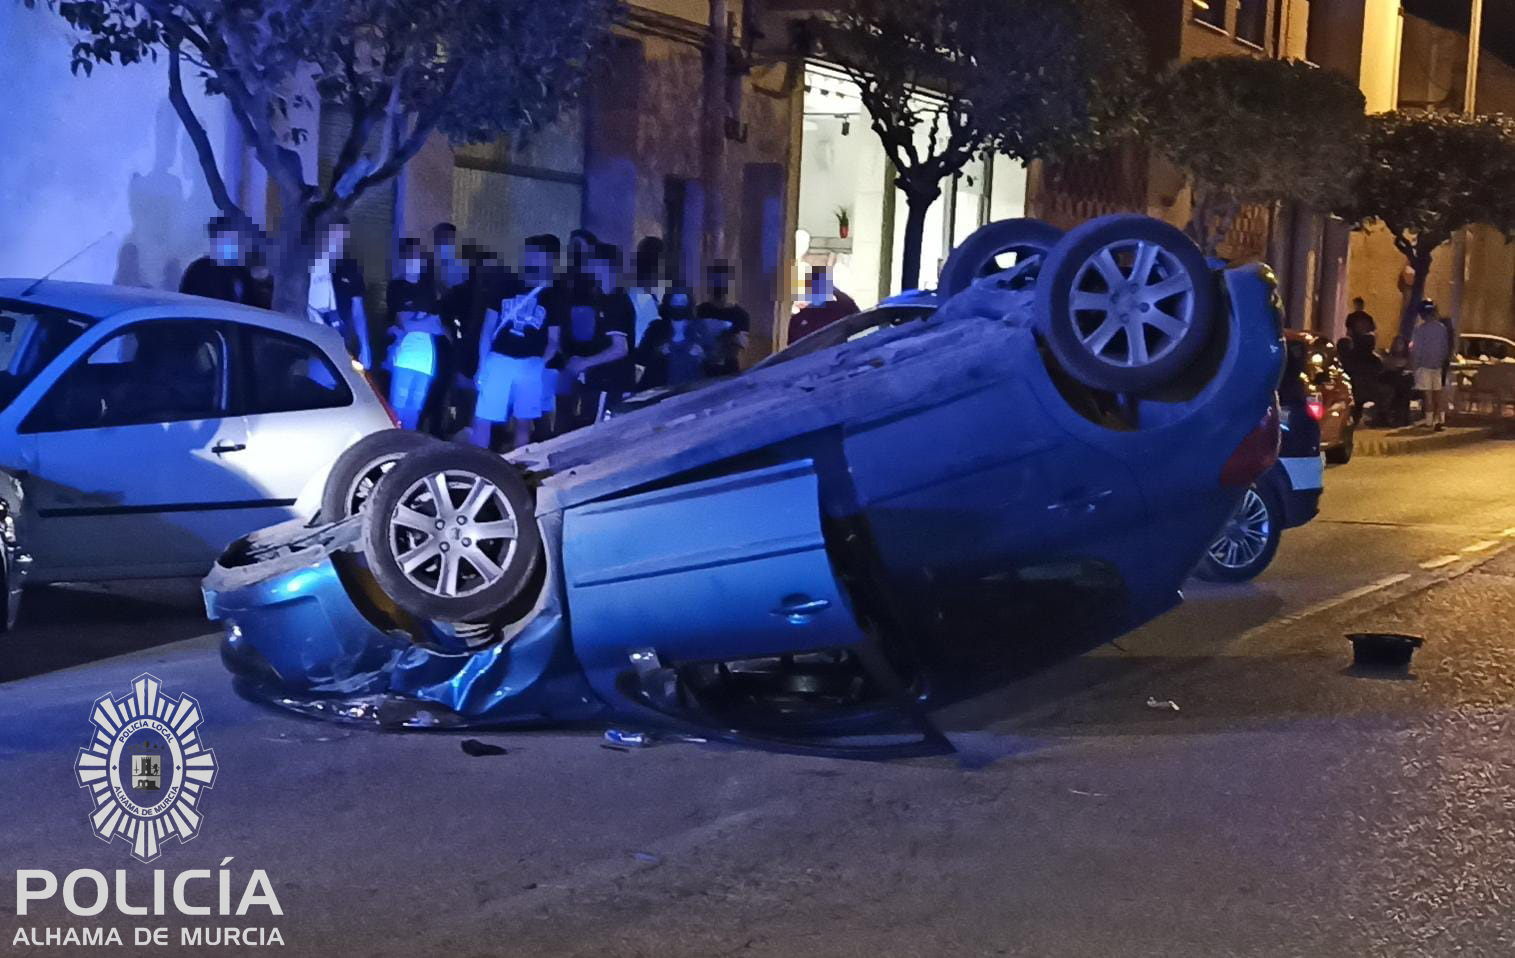 Drunk Driver Flips Car And Then Assaults Paramedics In Murcia Area Of Spain